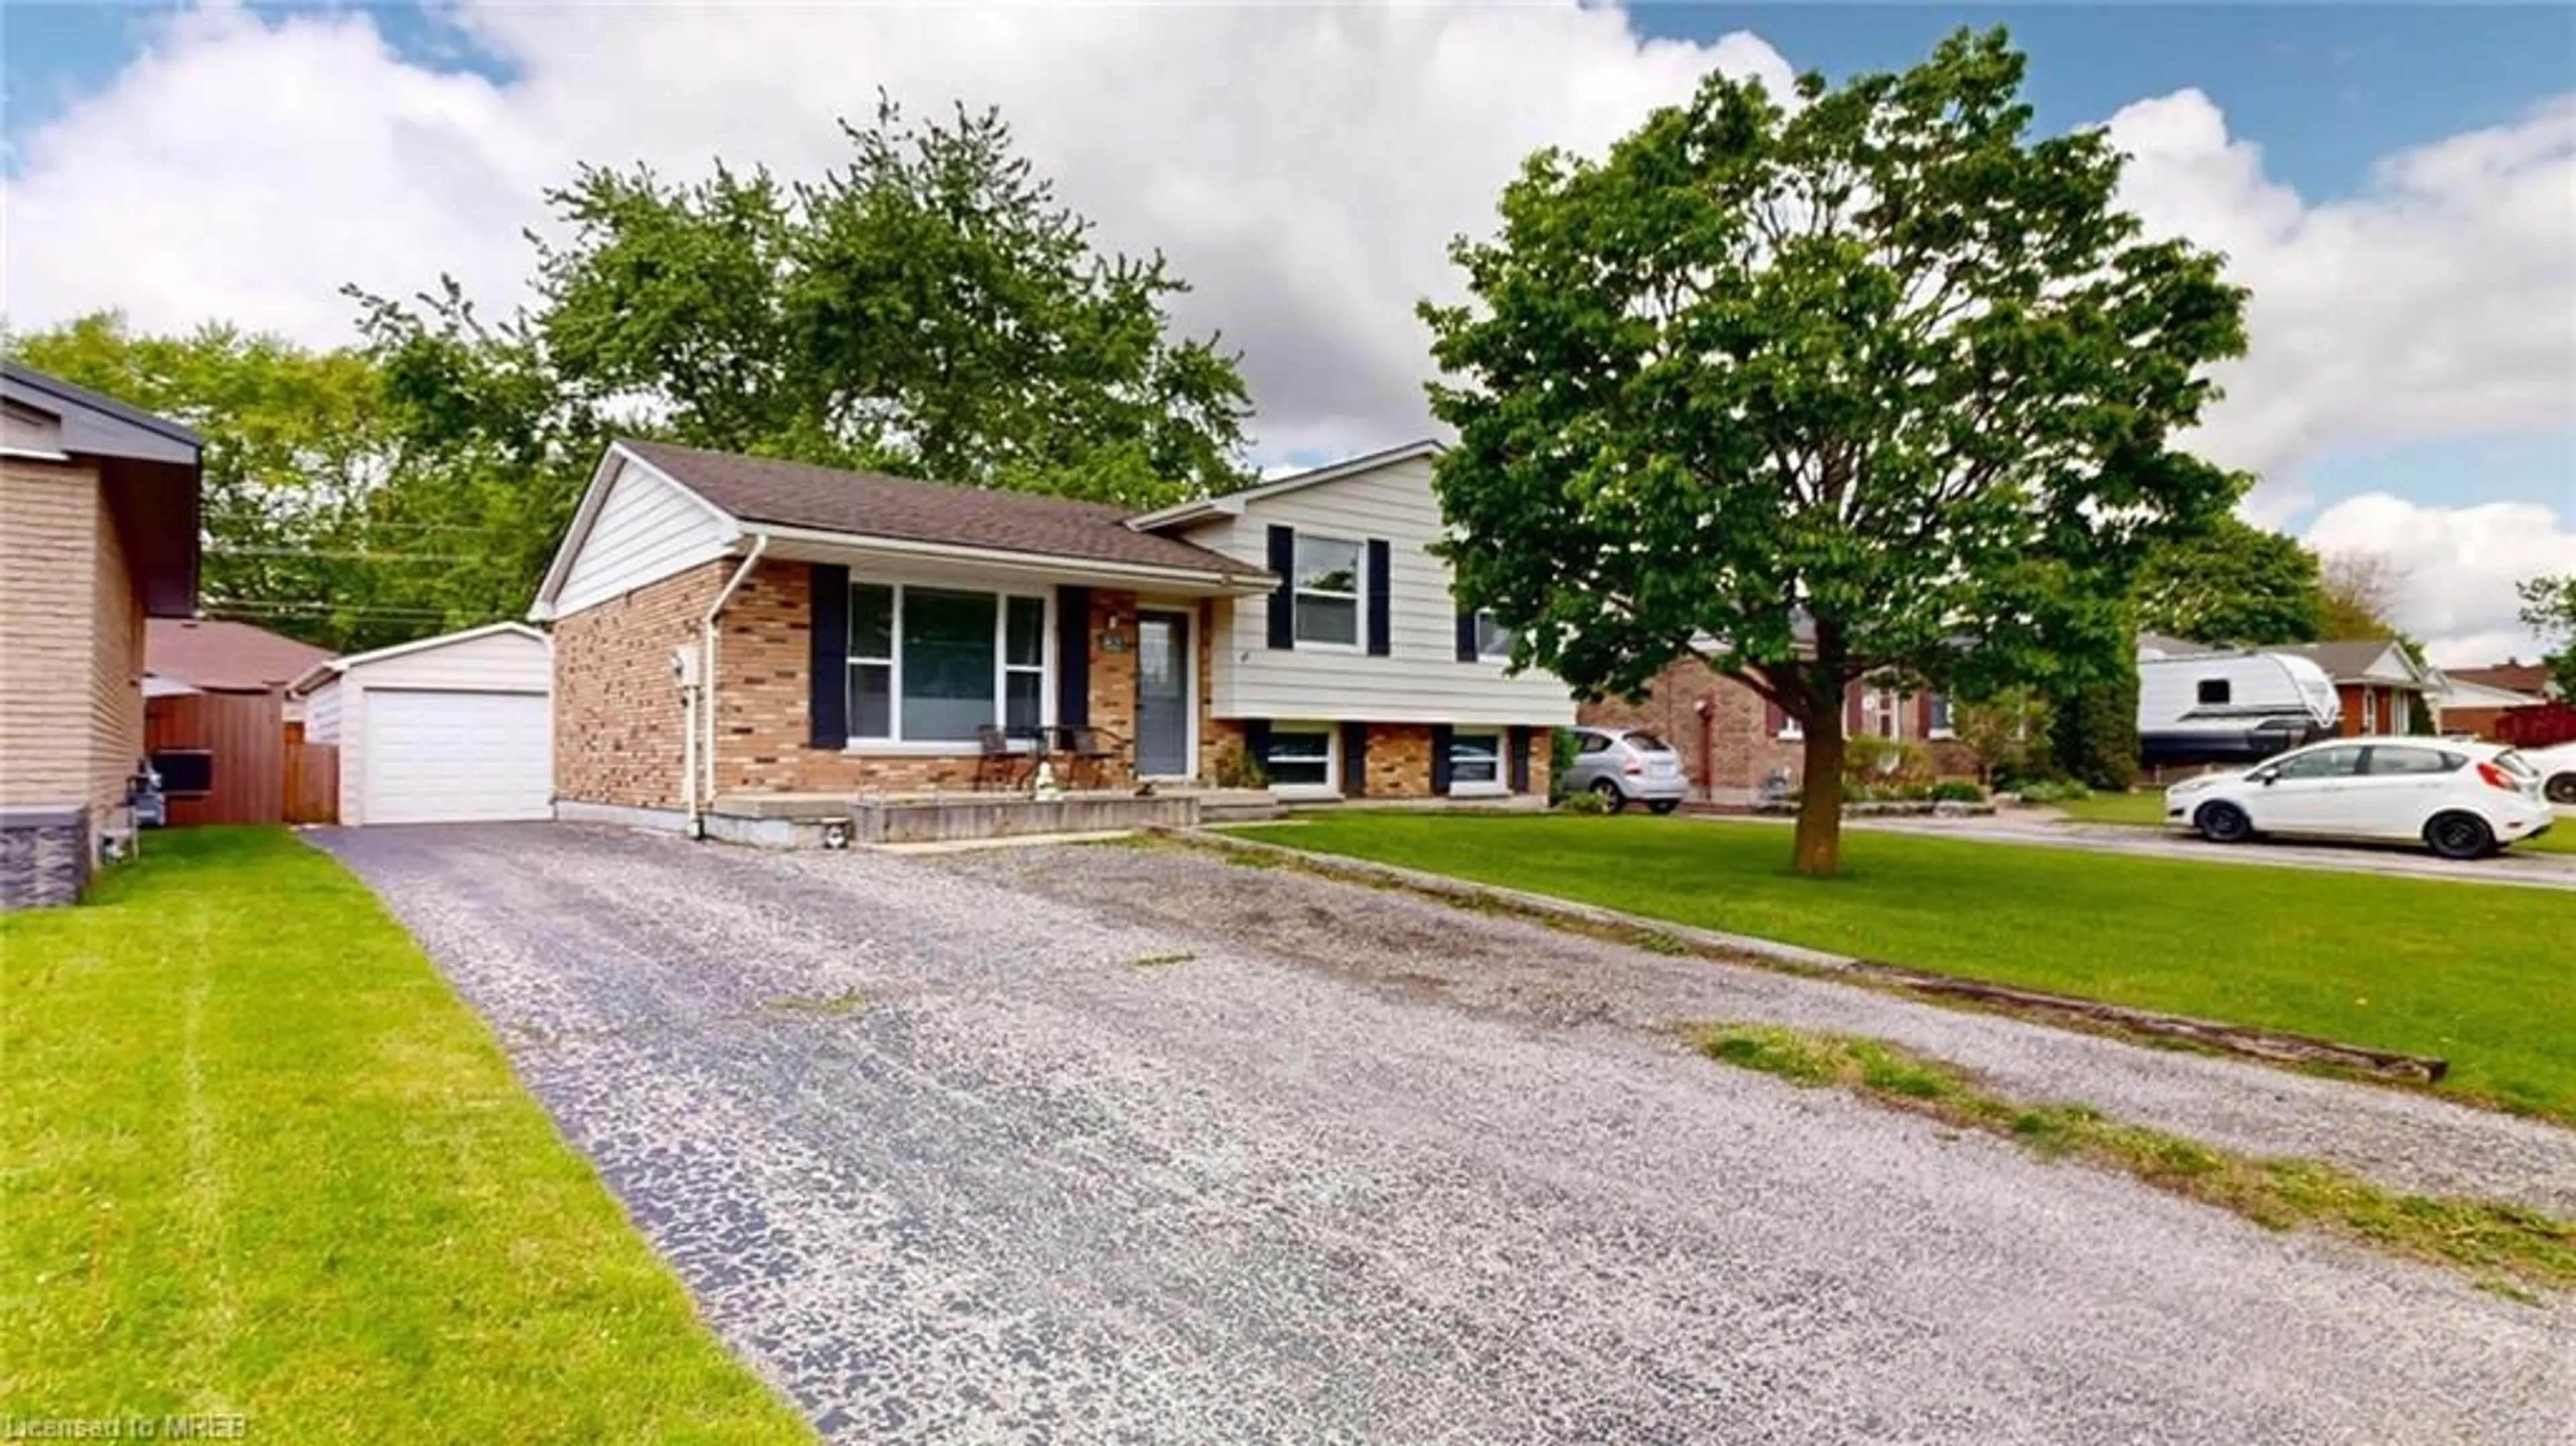 Home with brick exterior material for 82 Moore Ave, Aylmer Ontario N5H 2Z9